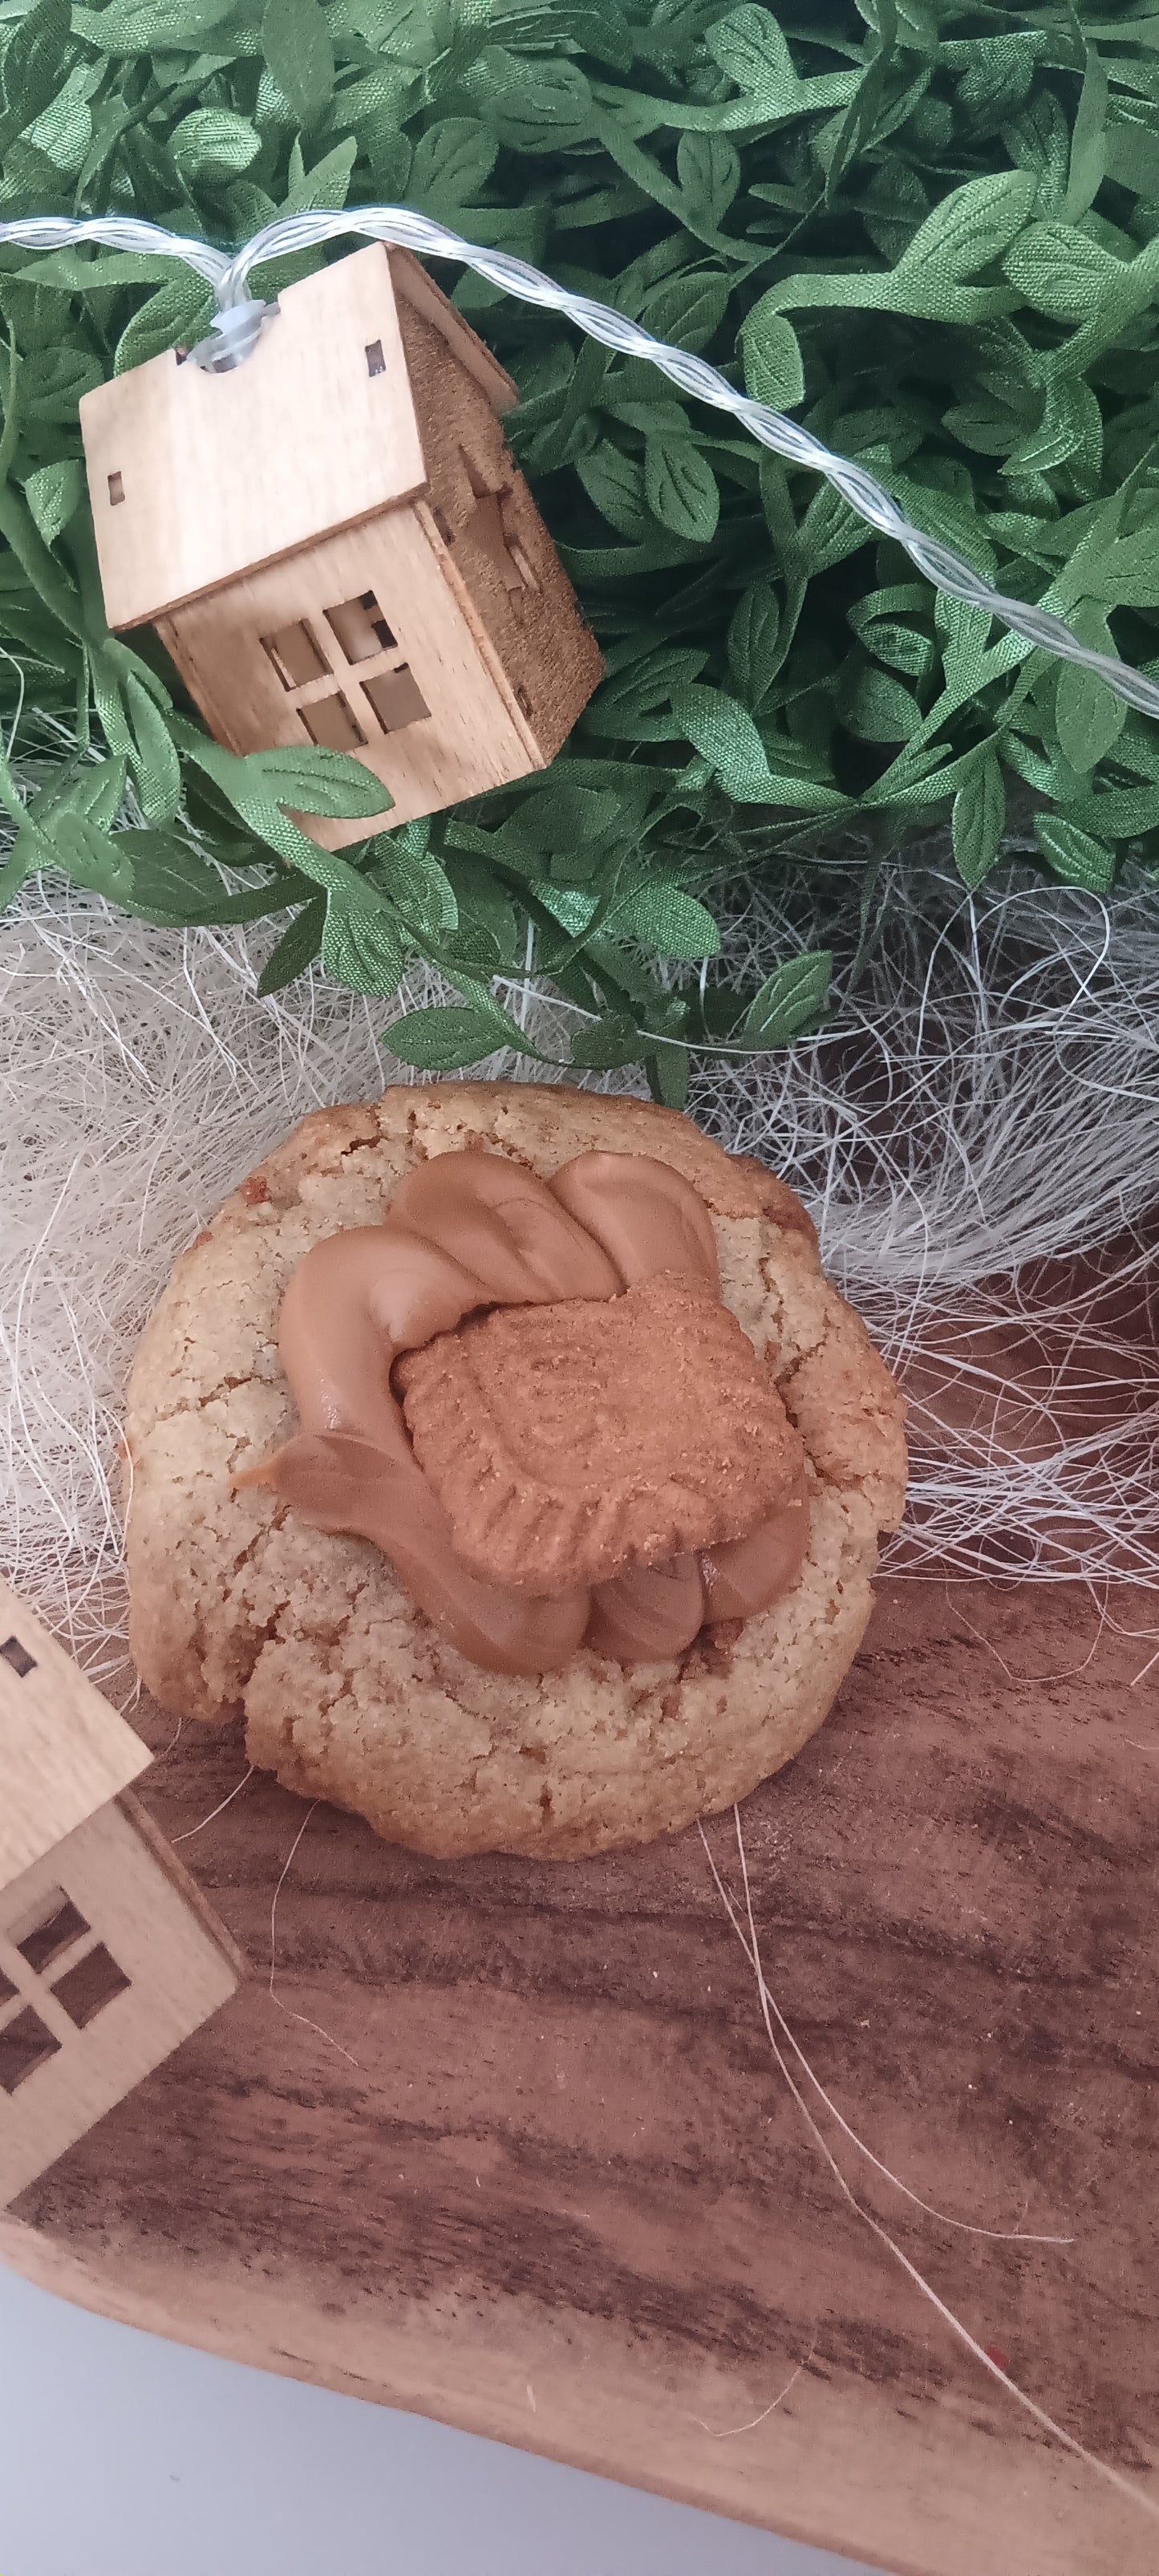 Cookie gourmand speculoos